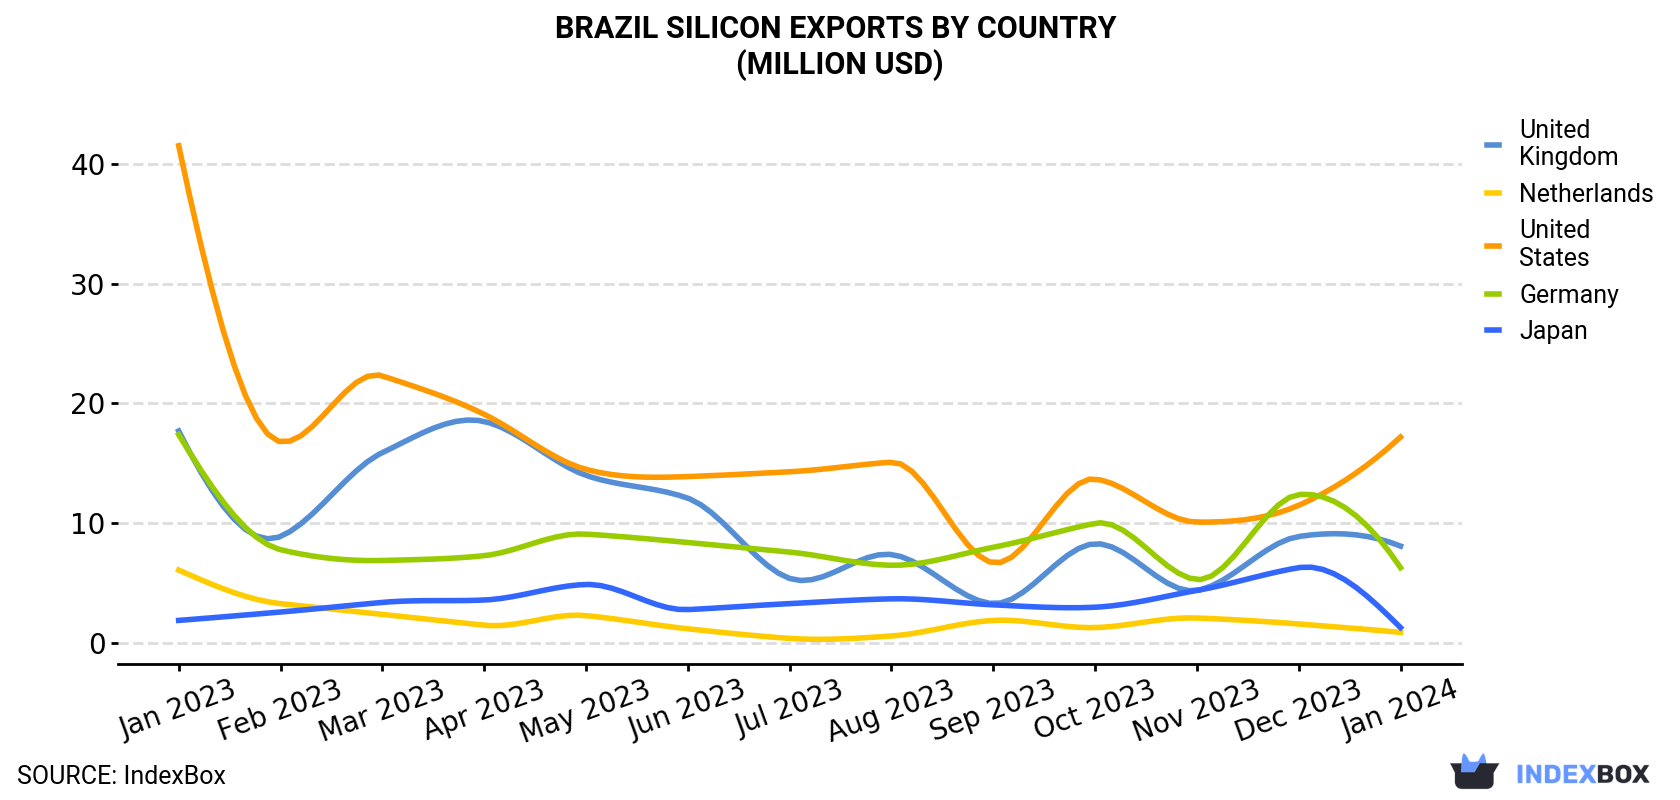 Brazil Silicon Exports By Country (Million USD)